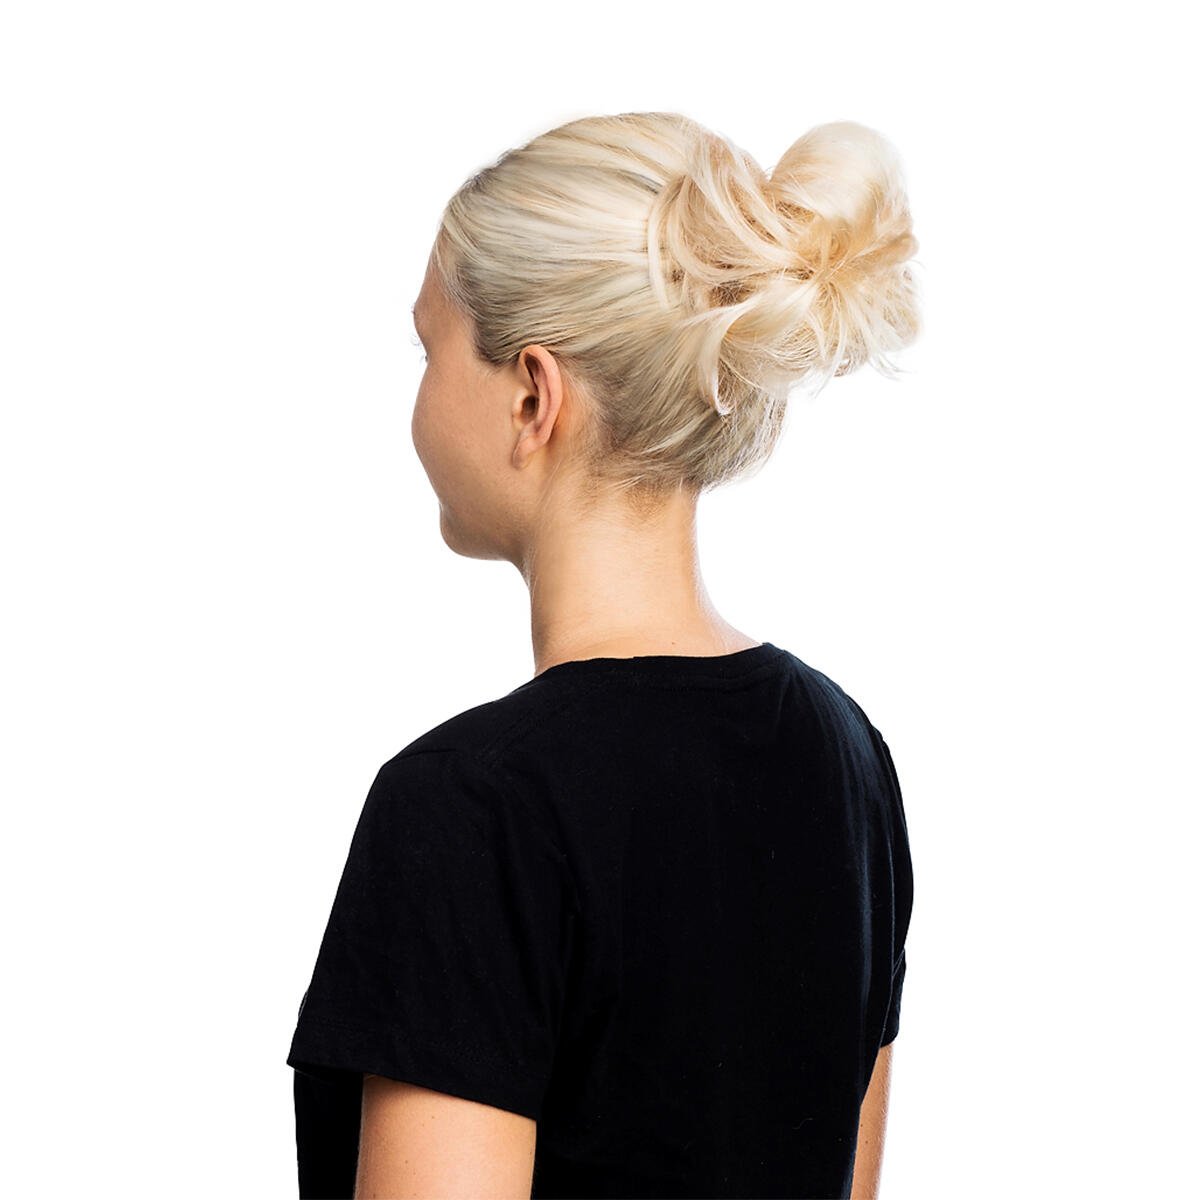 Volume Hair Scrunchie 40 G Scrunchie with real hair M7.3/10.8 Cendre Ash Blonde Mix